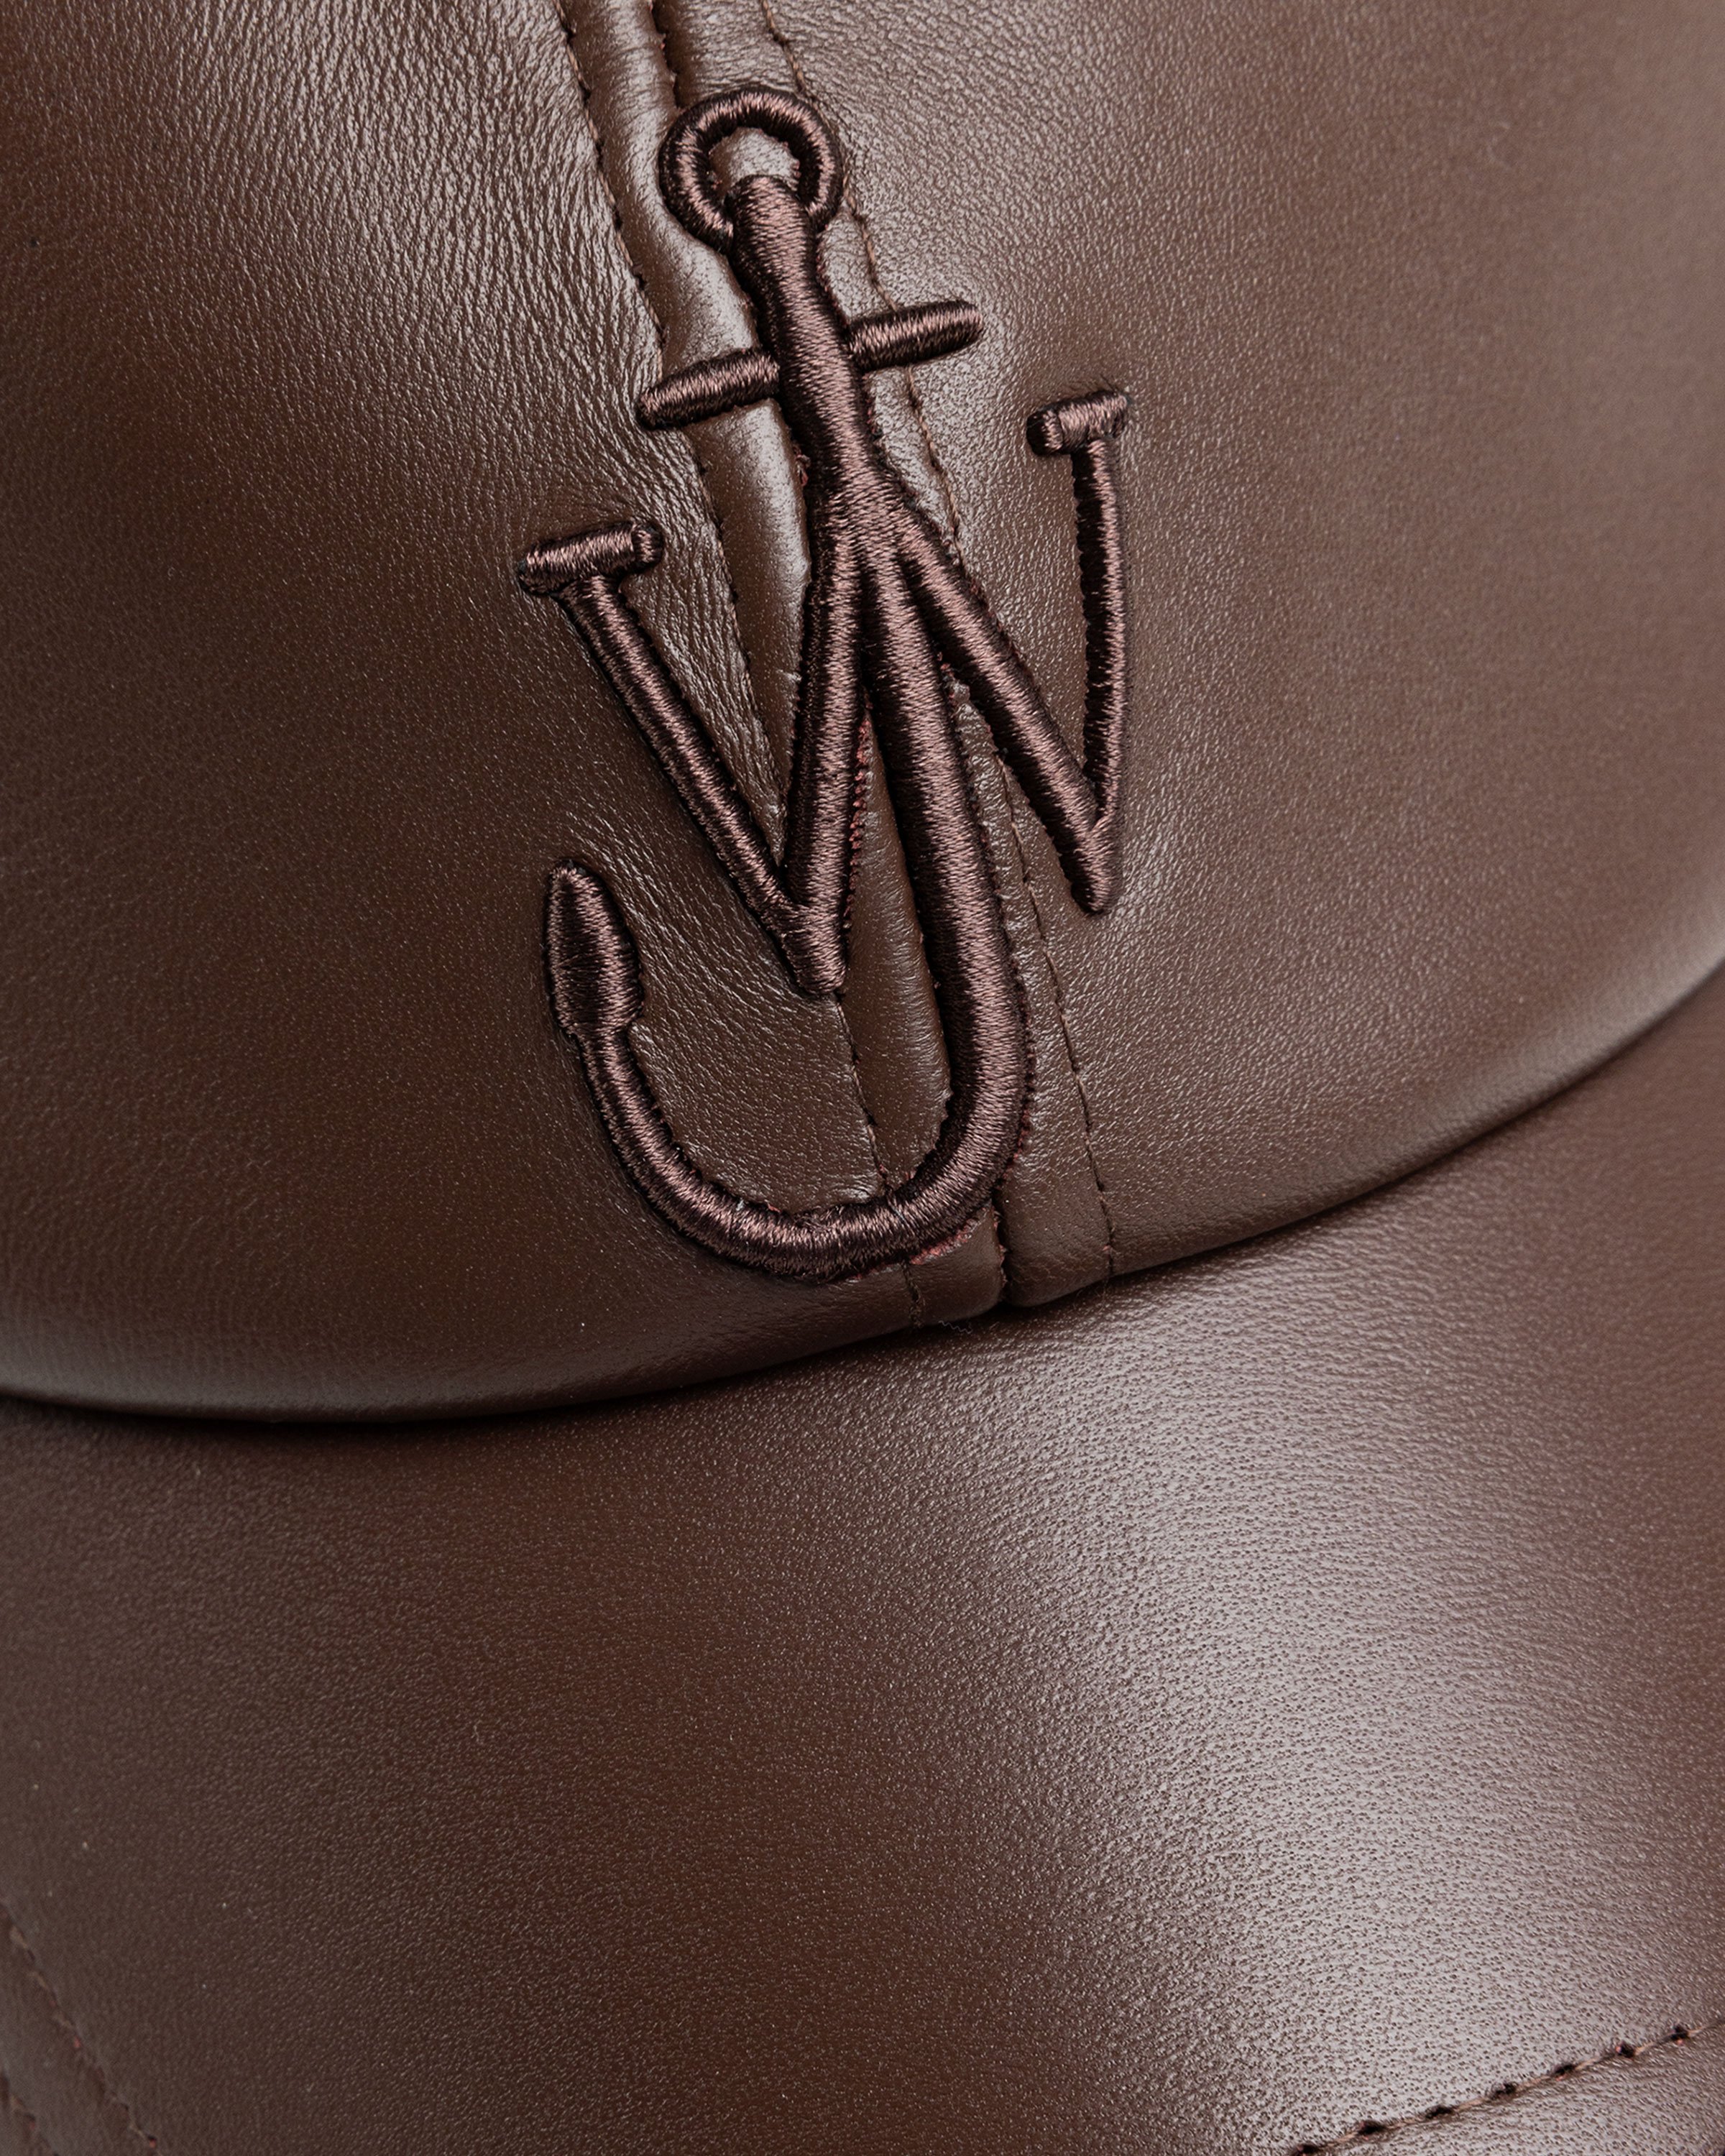 J.W. Anderson - Leather Baseball Cap Brown - Accessories - Brown - Image 4